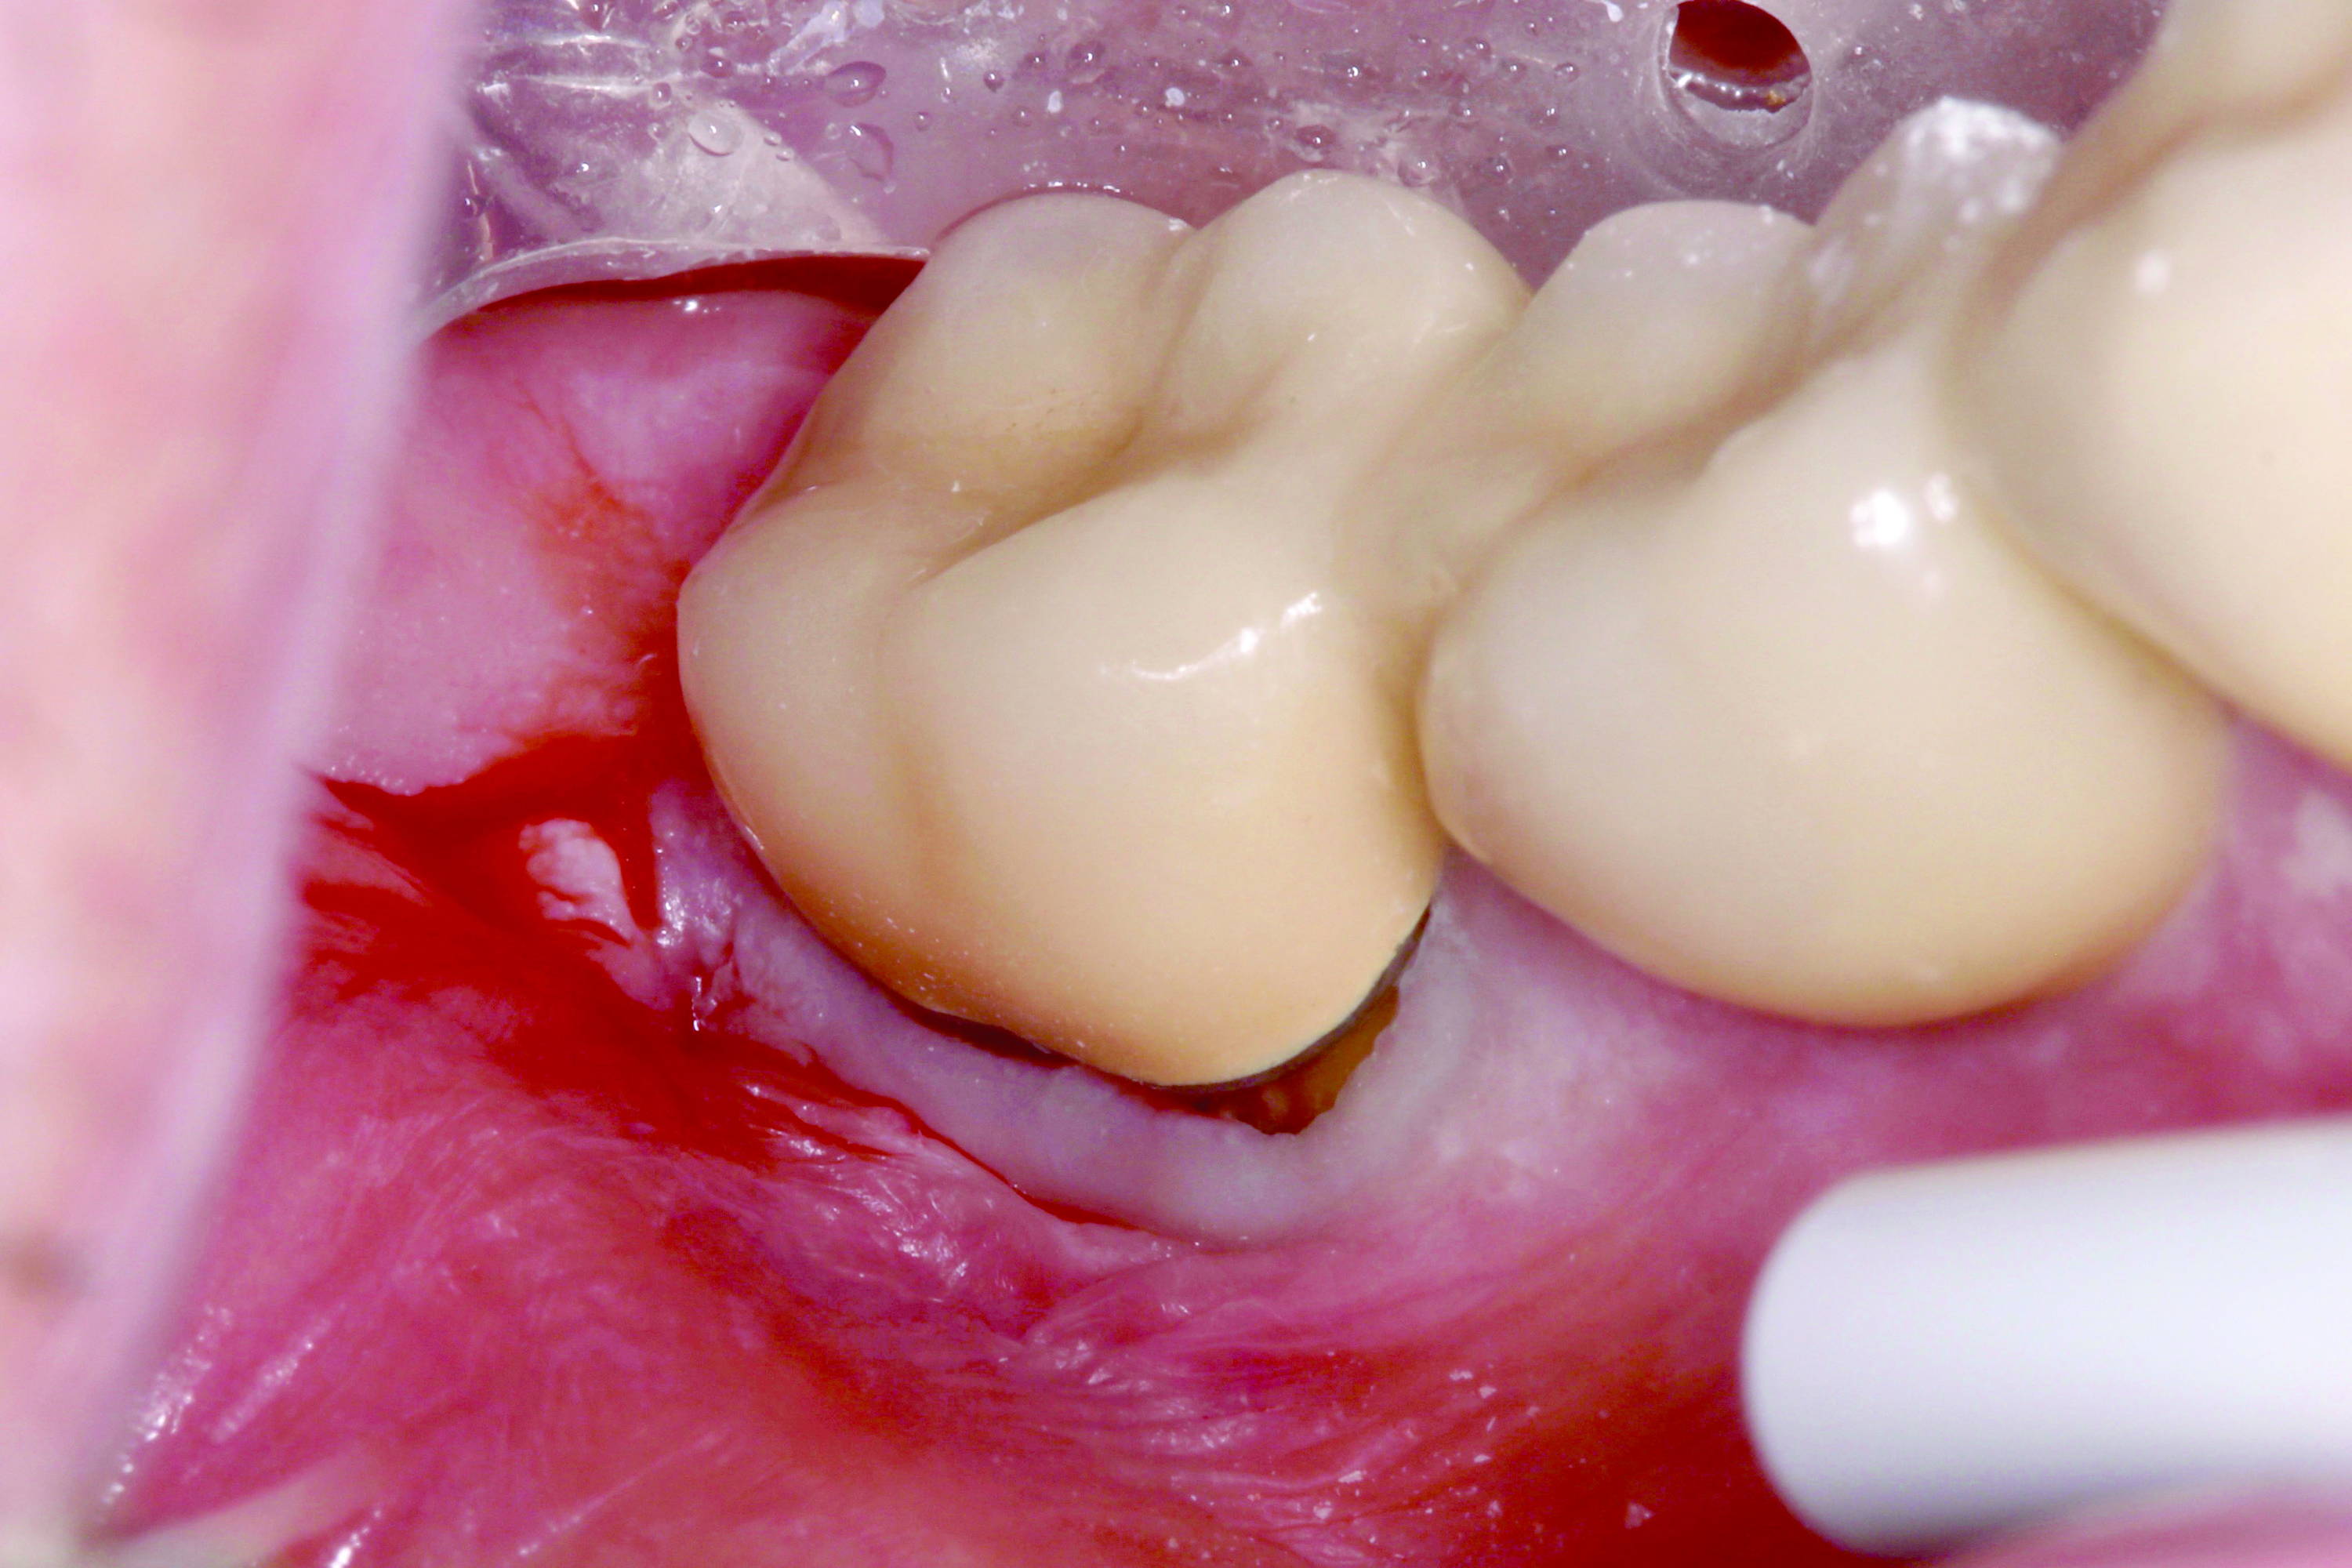 Mesial buccal decay under an existing crown